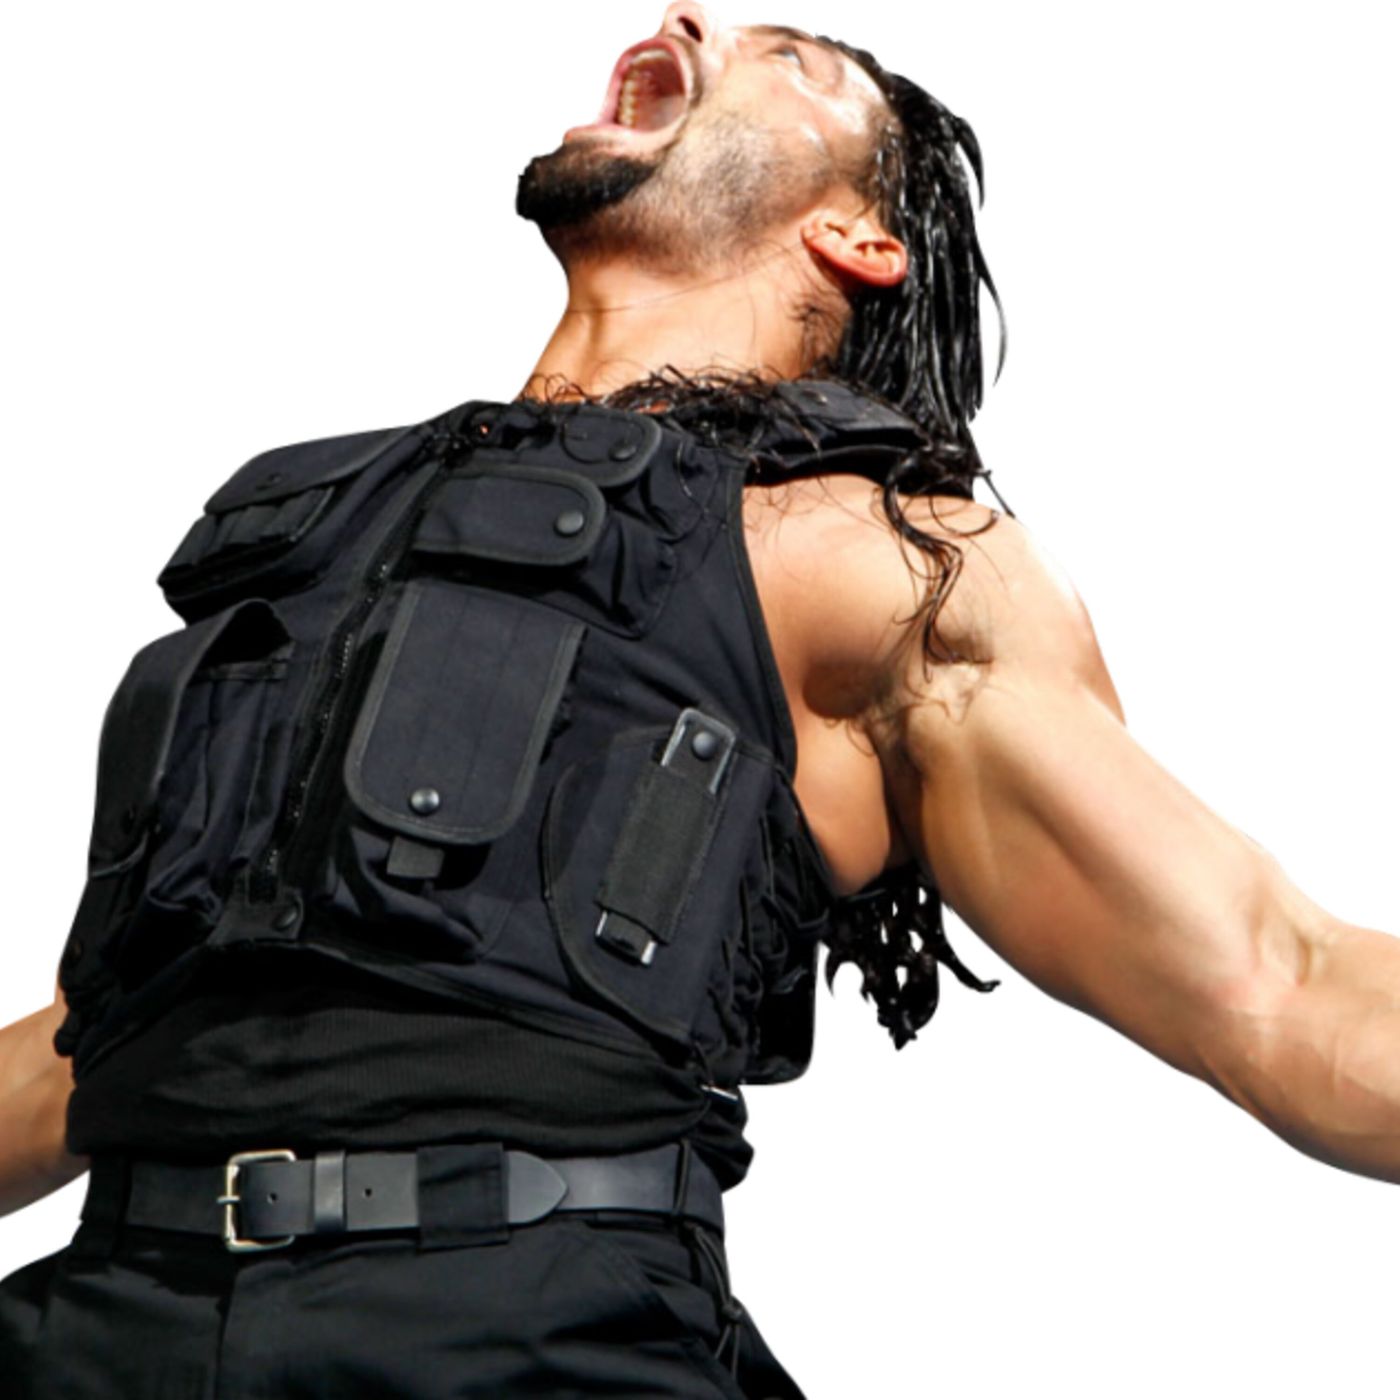 Reigns and the WWE Wellness Policy